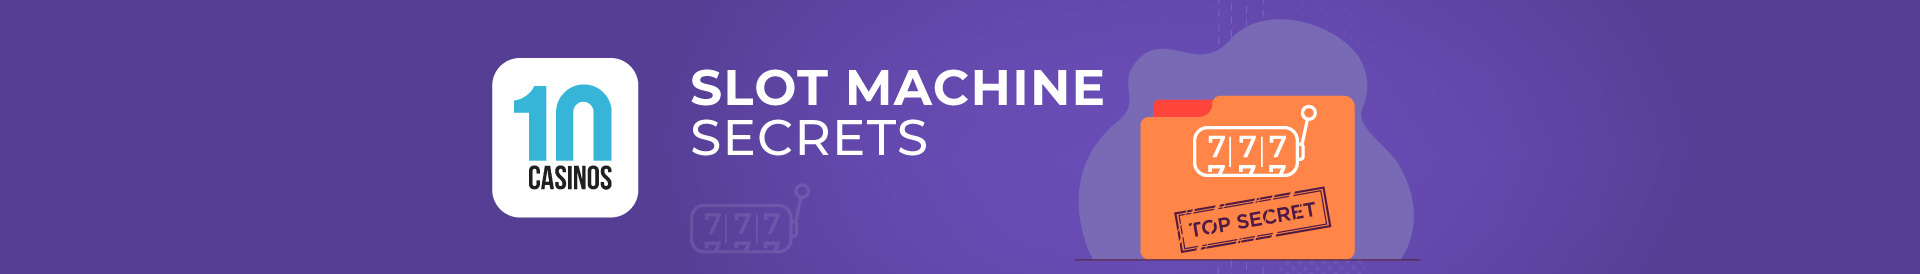 top 10 slot machine secrets you need to know today desktop